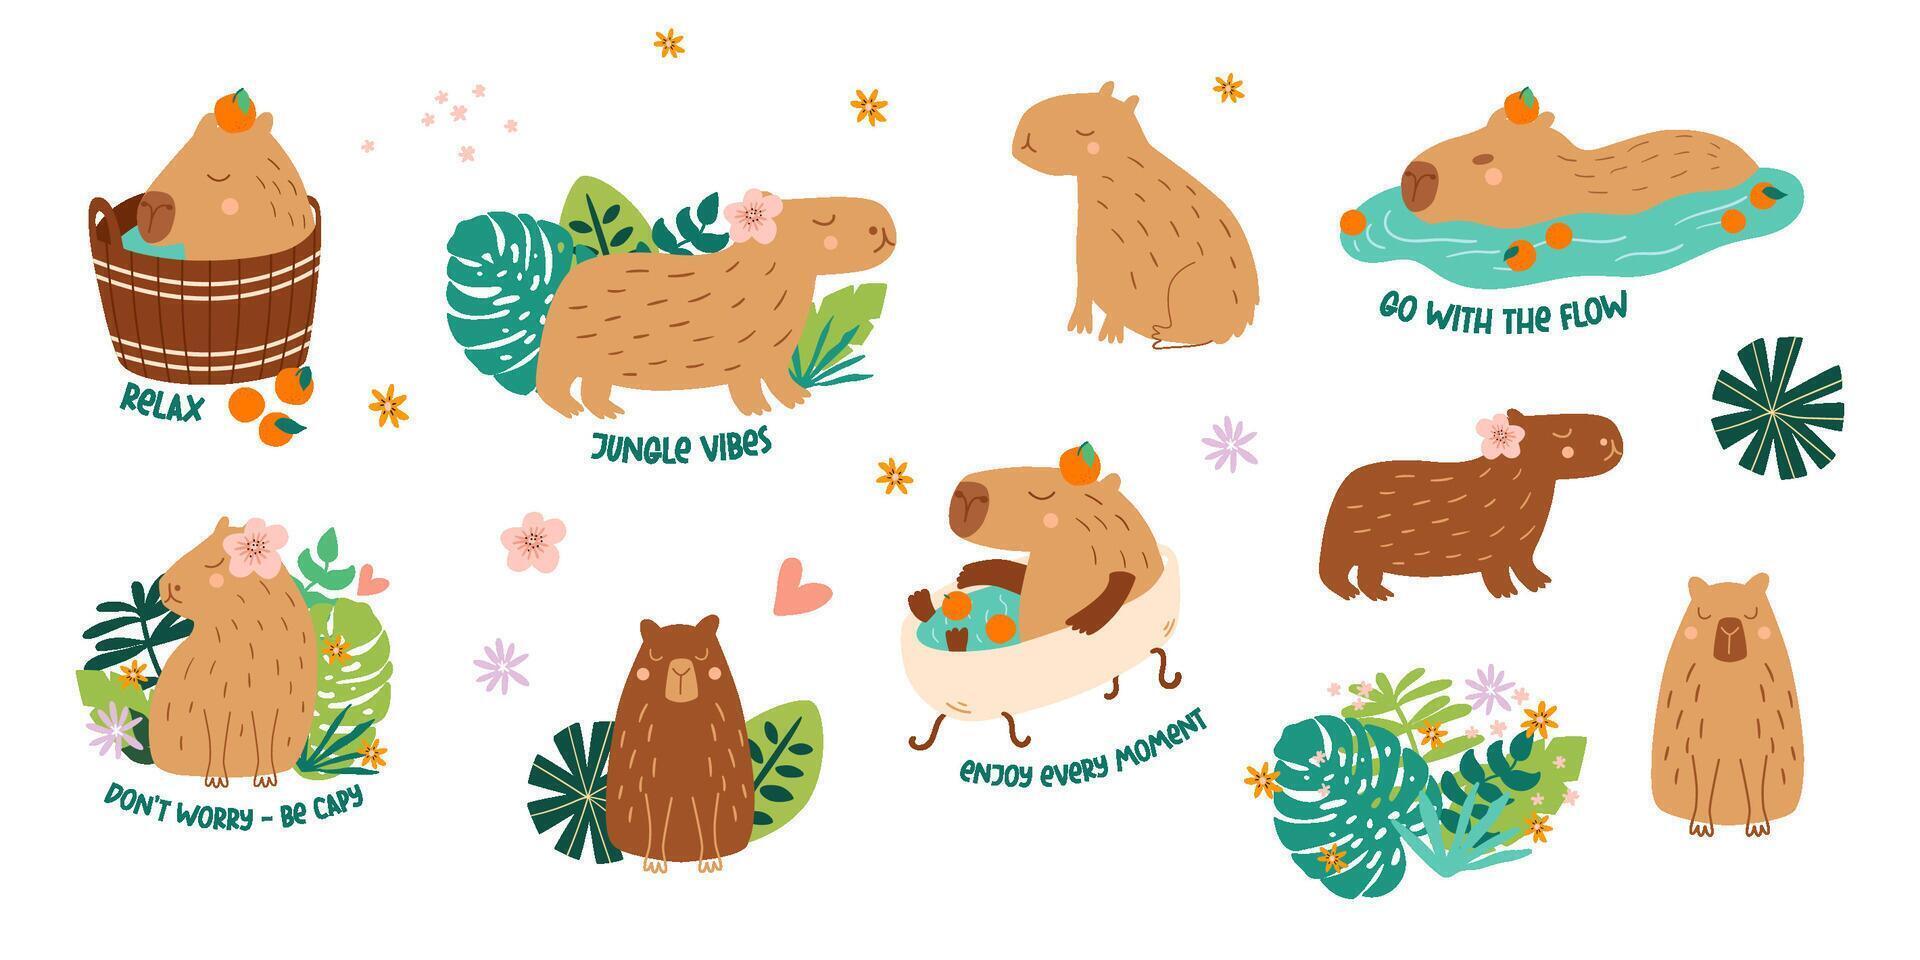 Capybara cartoon set. Cute capybara animal swimming, taking bath with tangerines, framed jungle leaves. Funny vector collection positive phrases, stickers, logo, isolated elements in childish style.